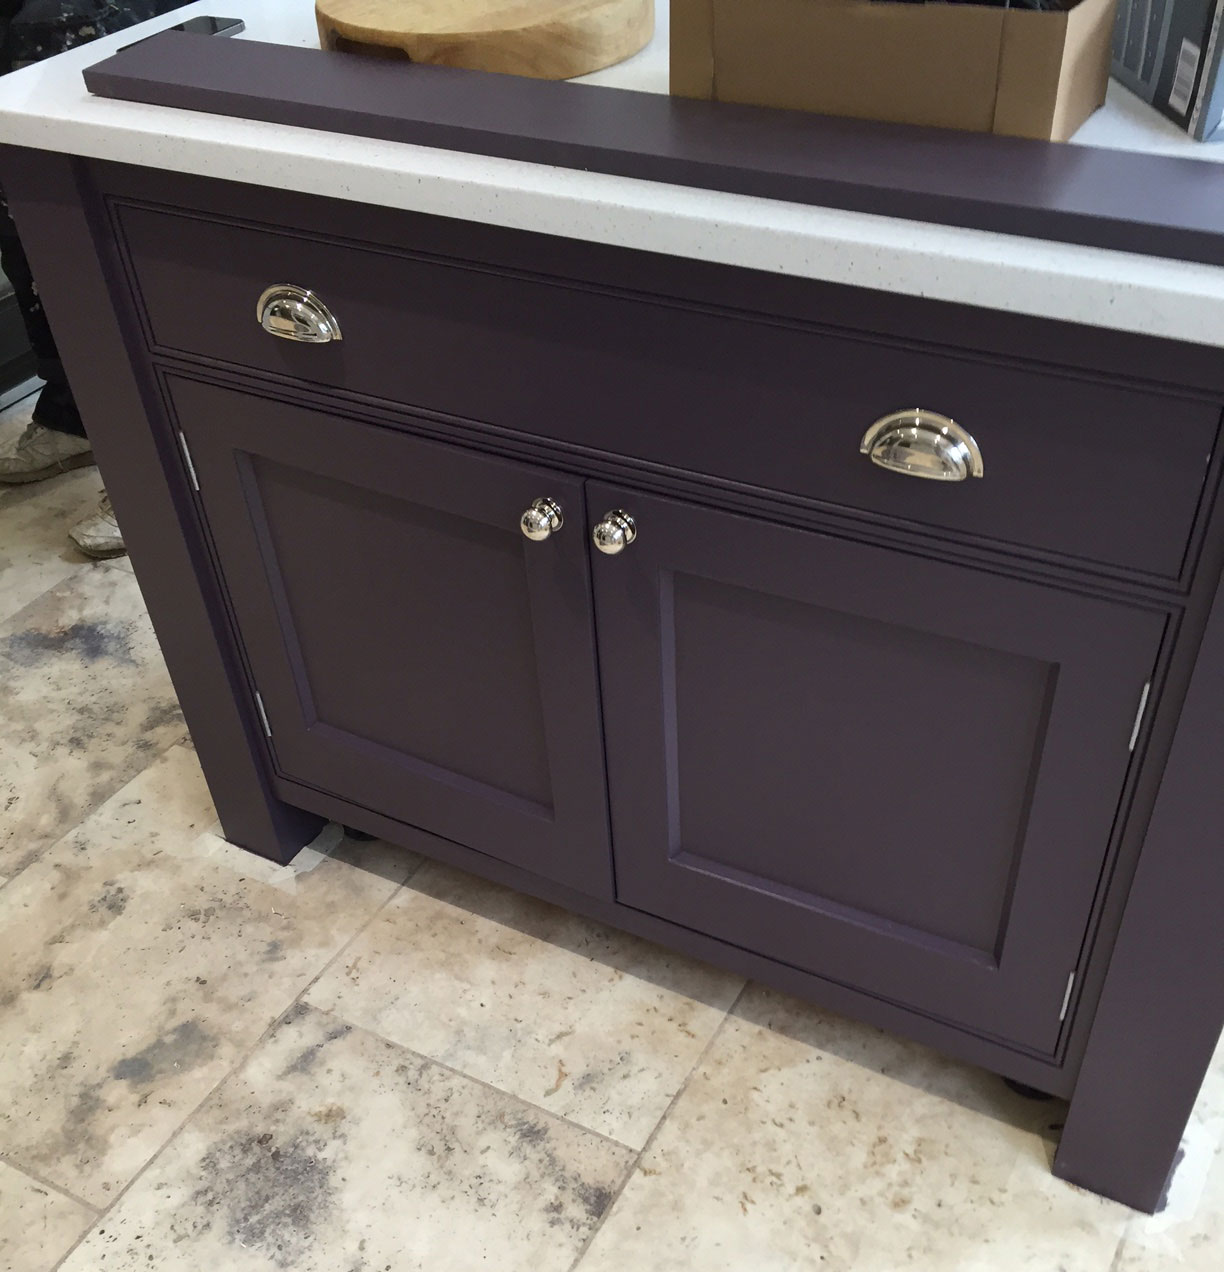 New kitchen island installation and painting